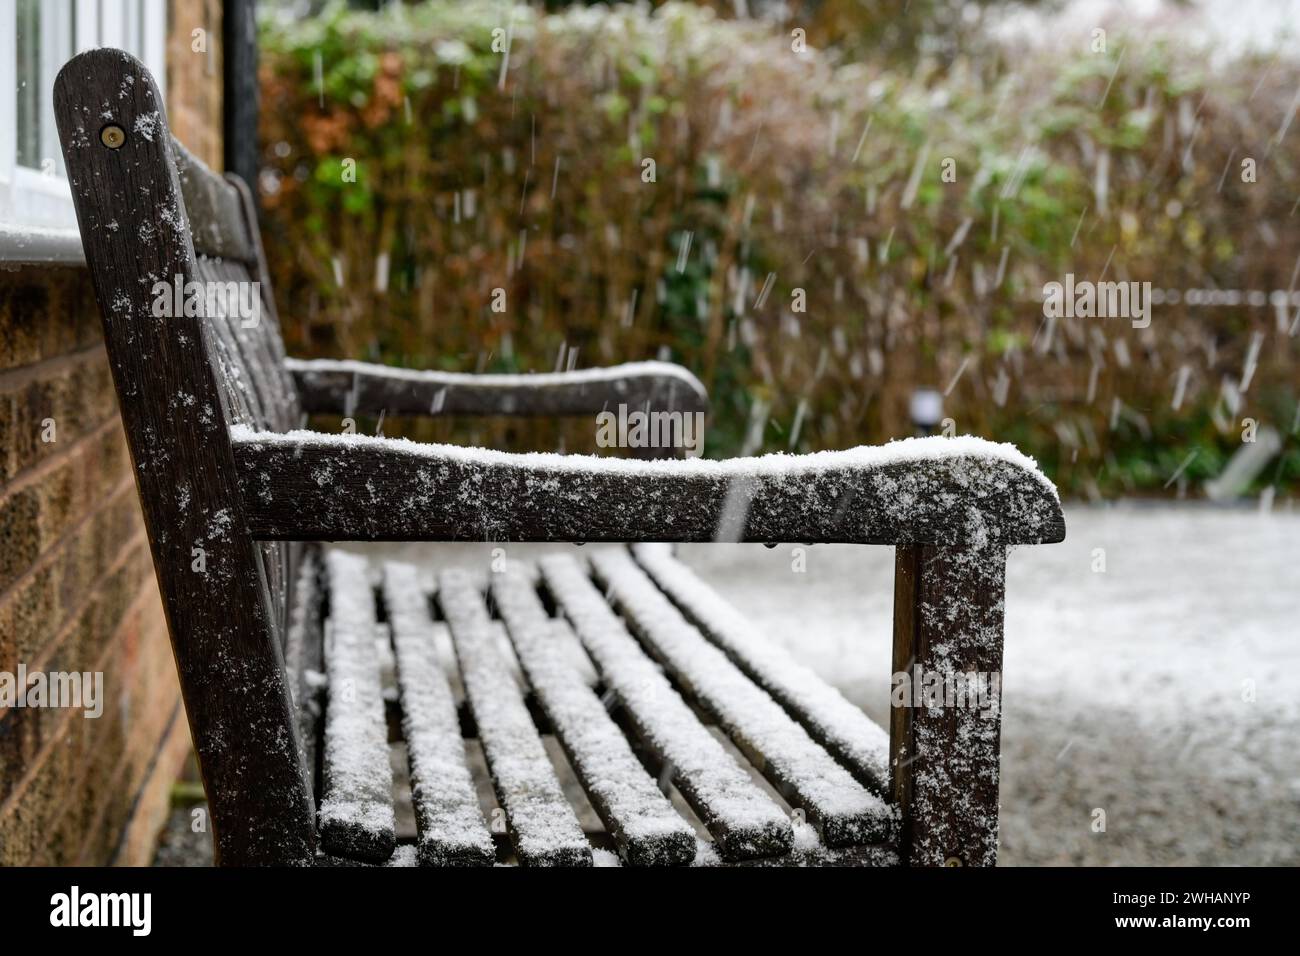 A side view of a wooden bench covered in a dusting of snow Stock Photo